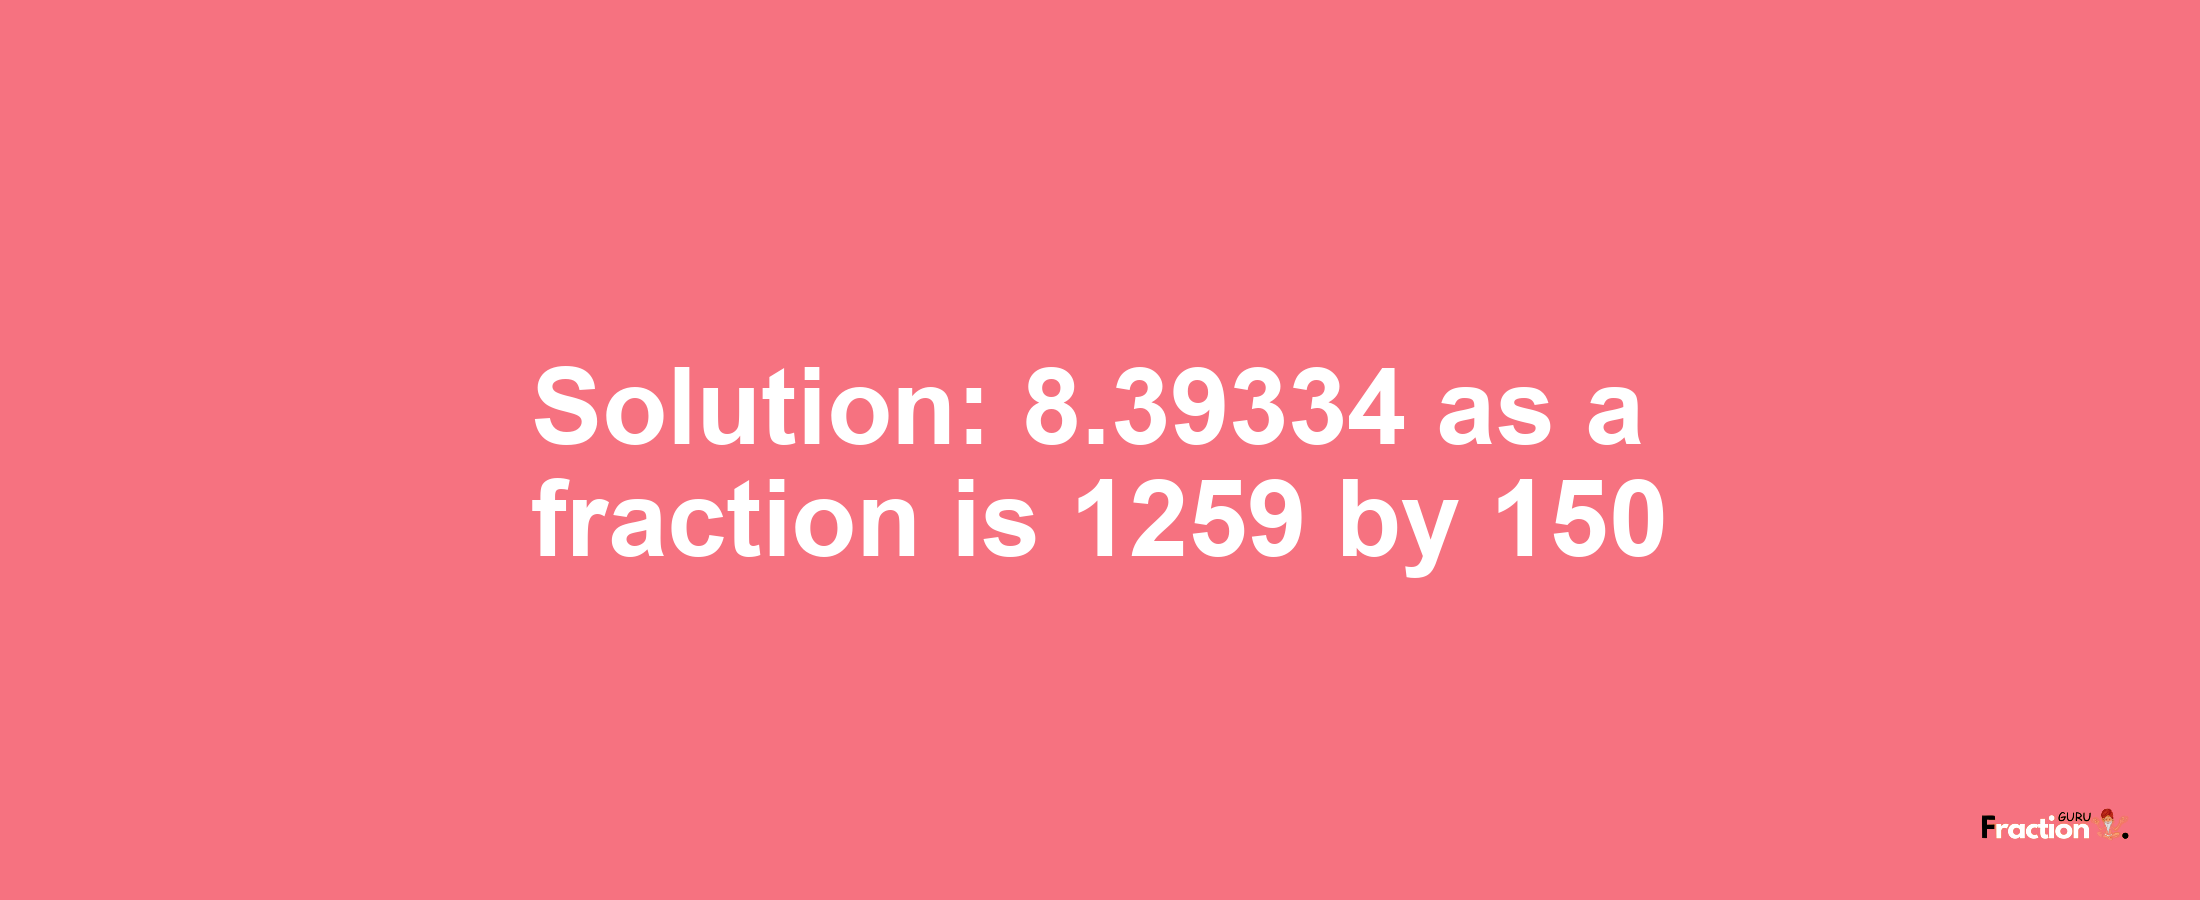 Solution:8.39334 as a fraction is 1259/150